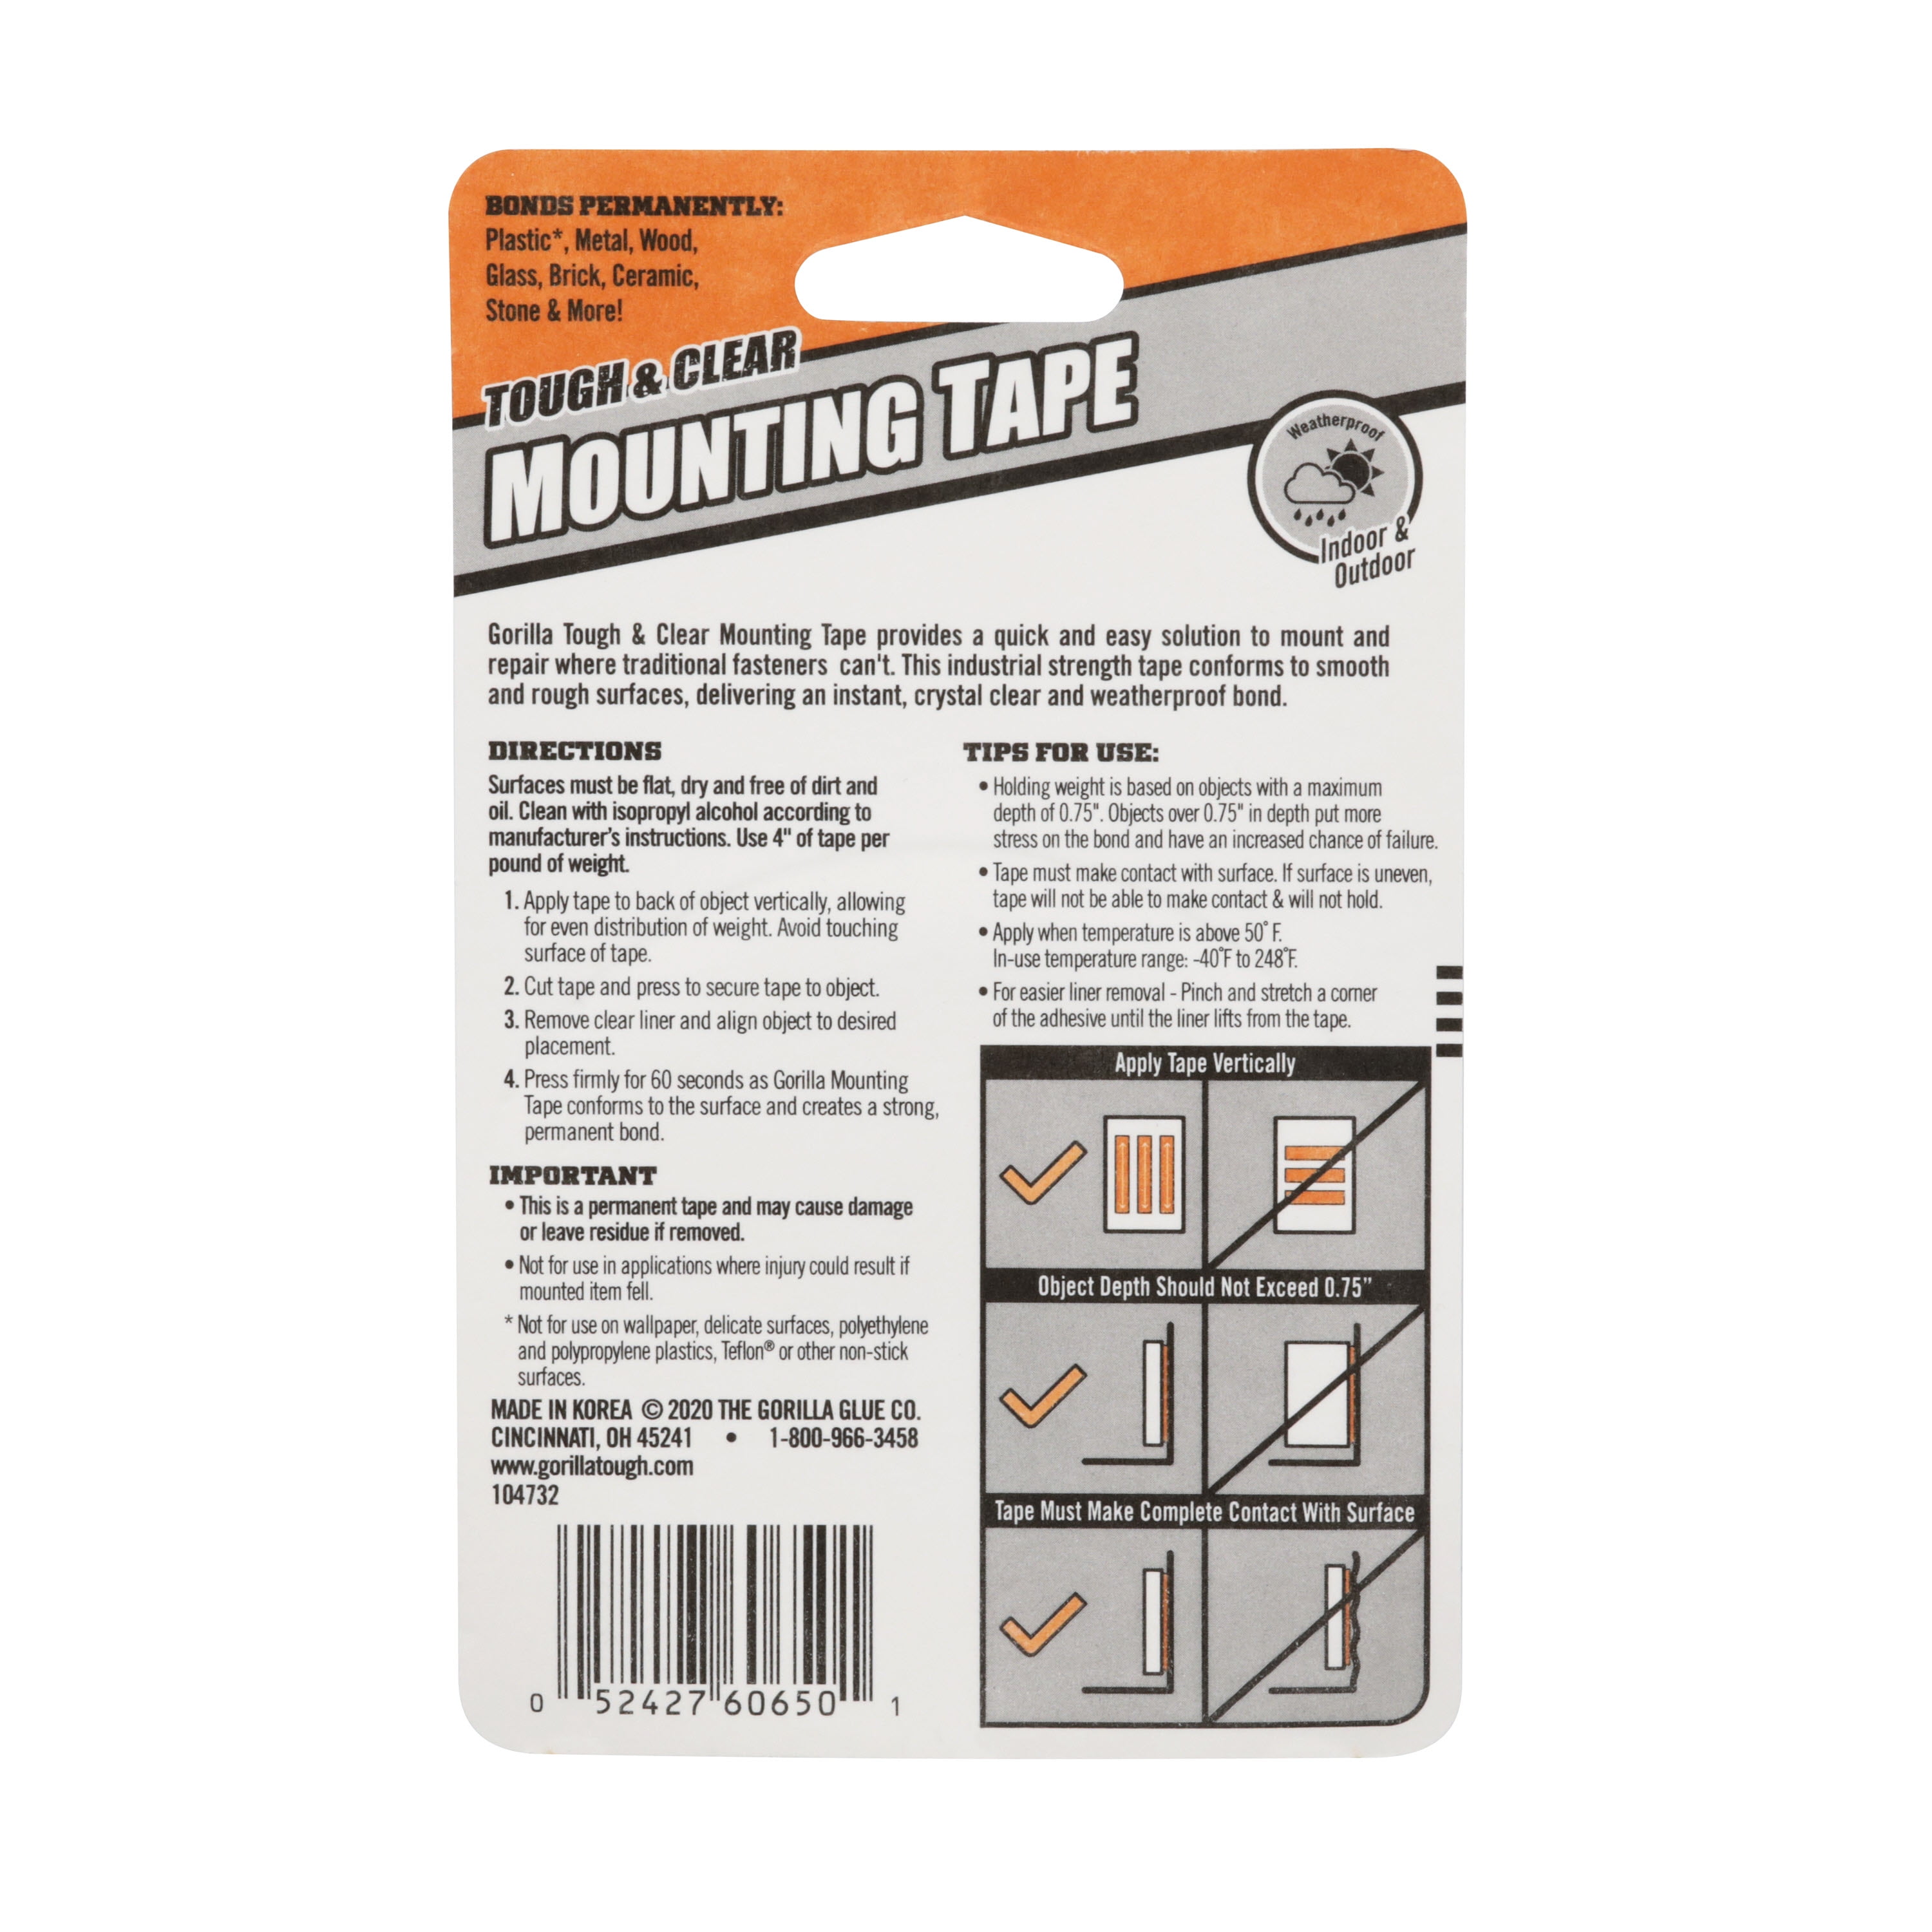 Gorilla Tough & Clear Double-Sided Mounting Tape, 60 Roll/ Model 6065201 